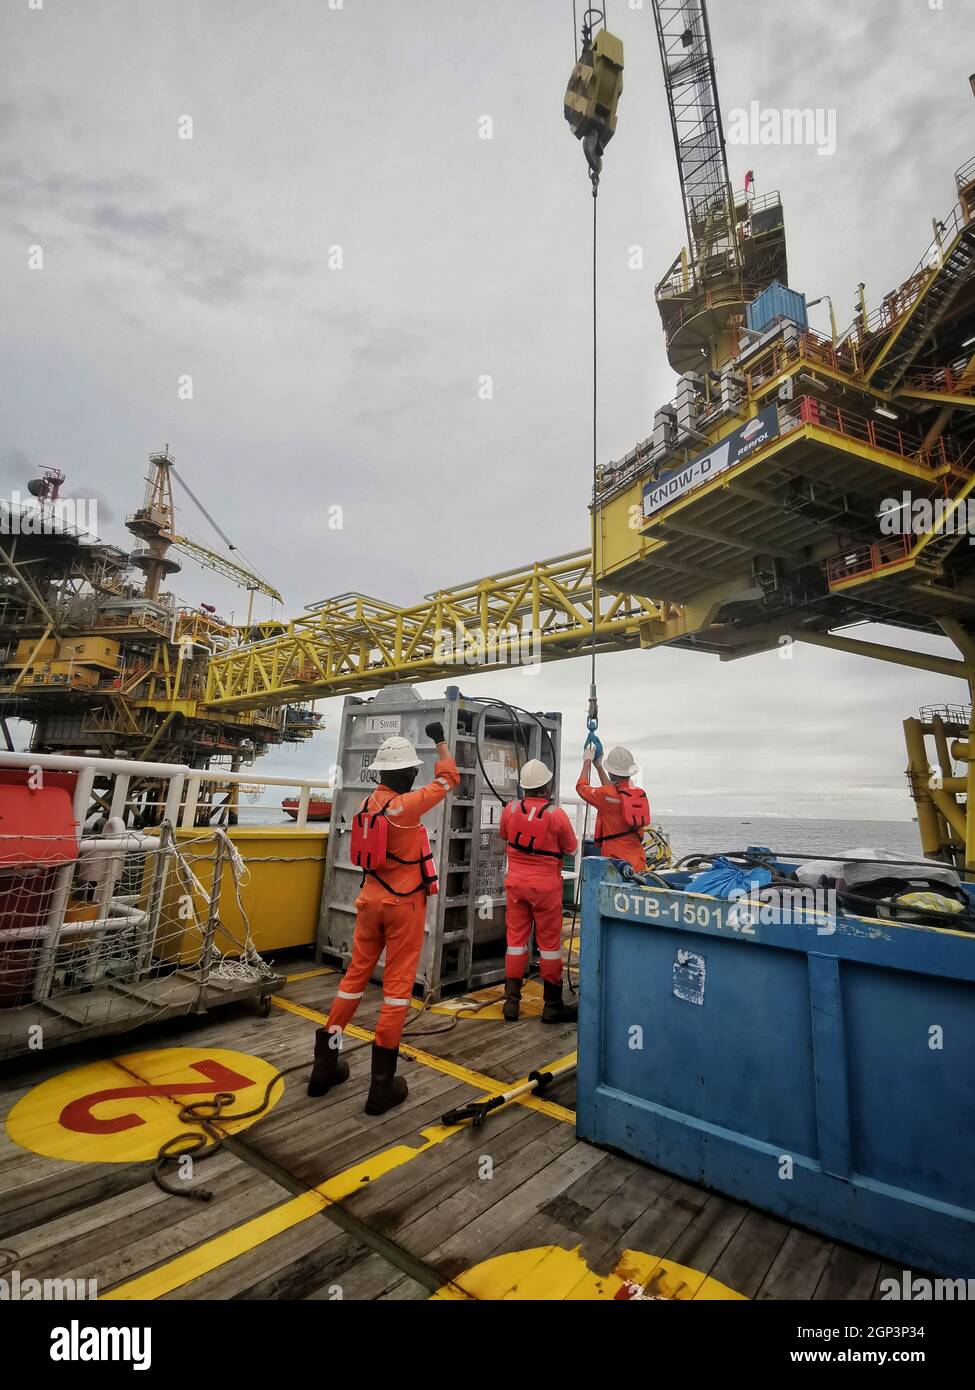 marine crew get ready to transfer oil platform personal to oil platform when weather in good condition Stock Photo